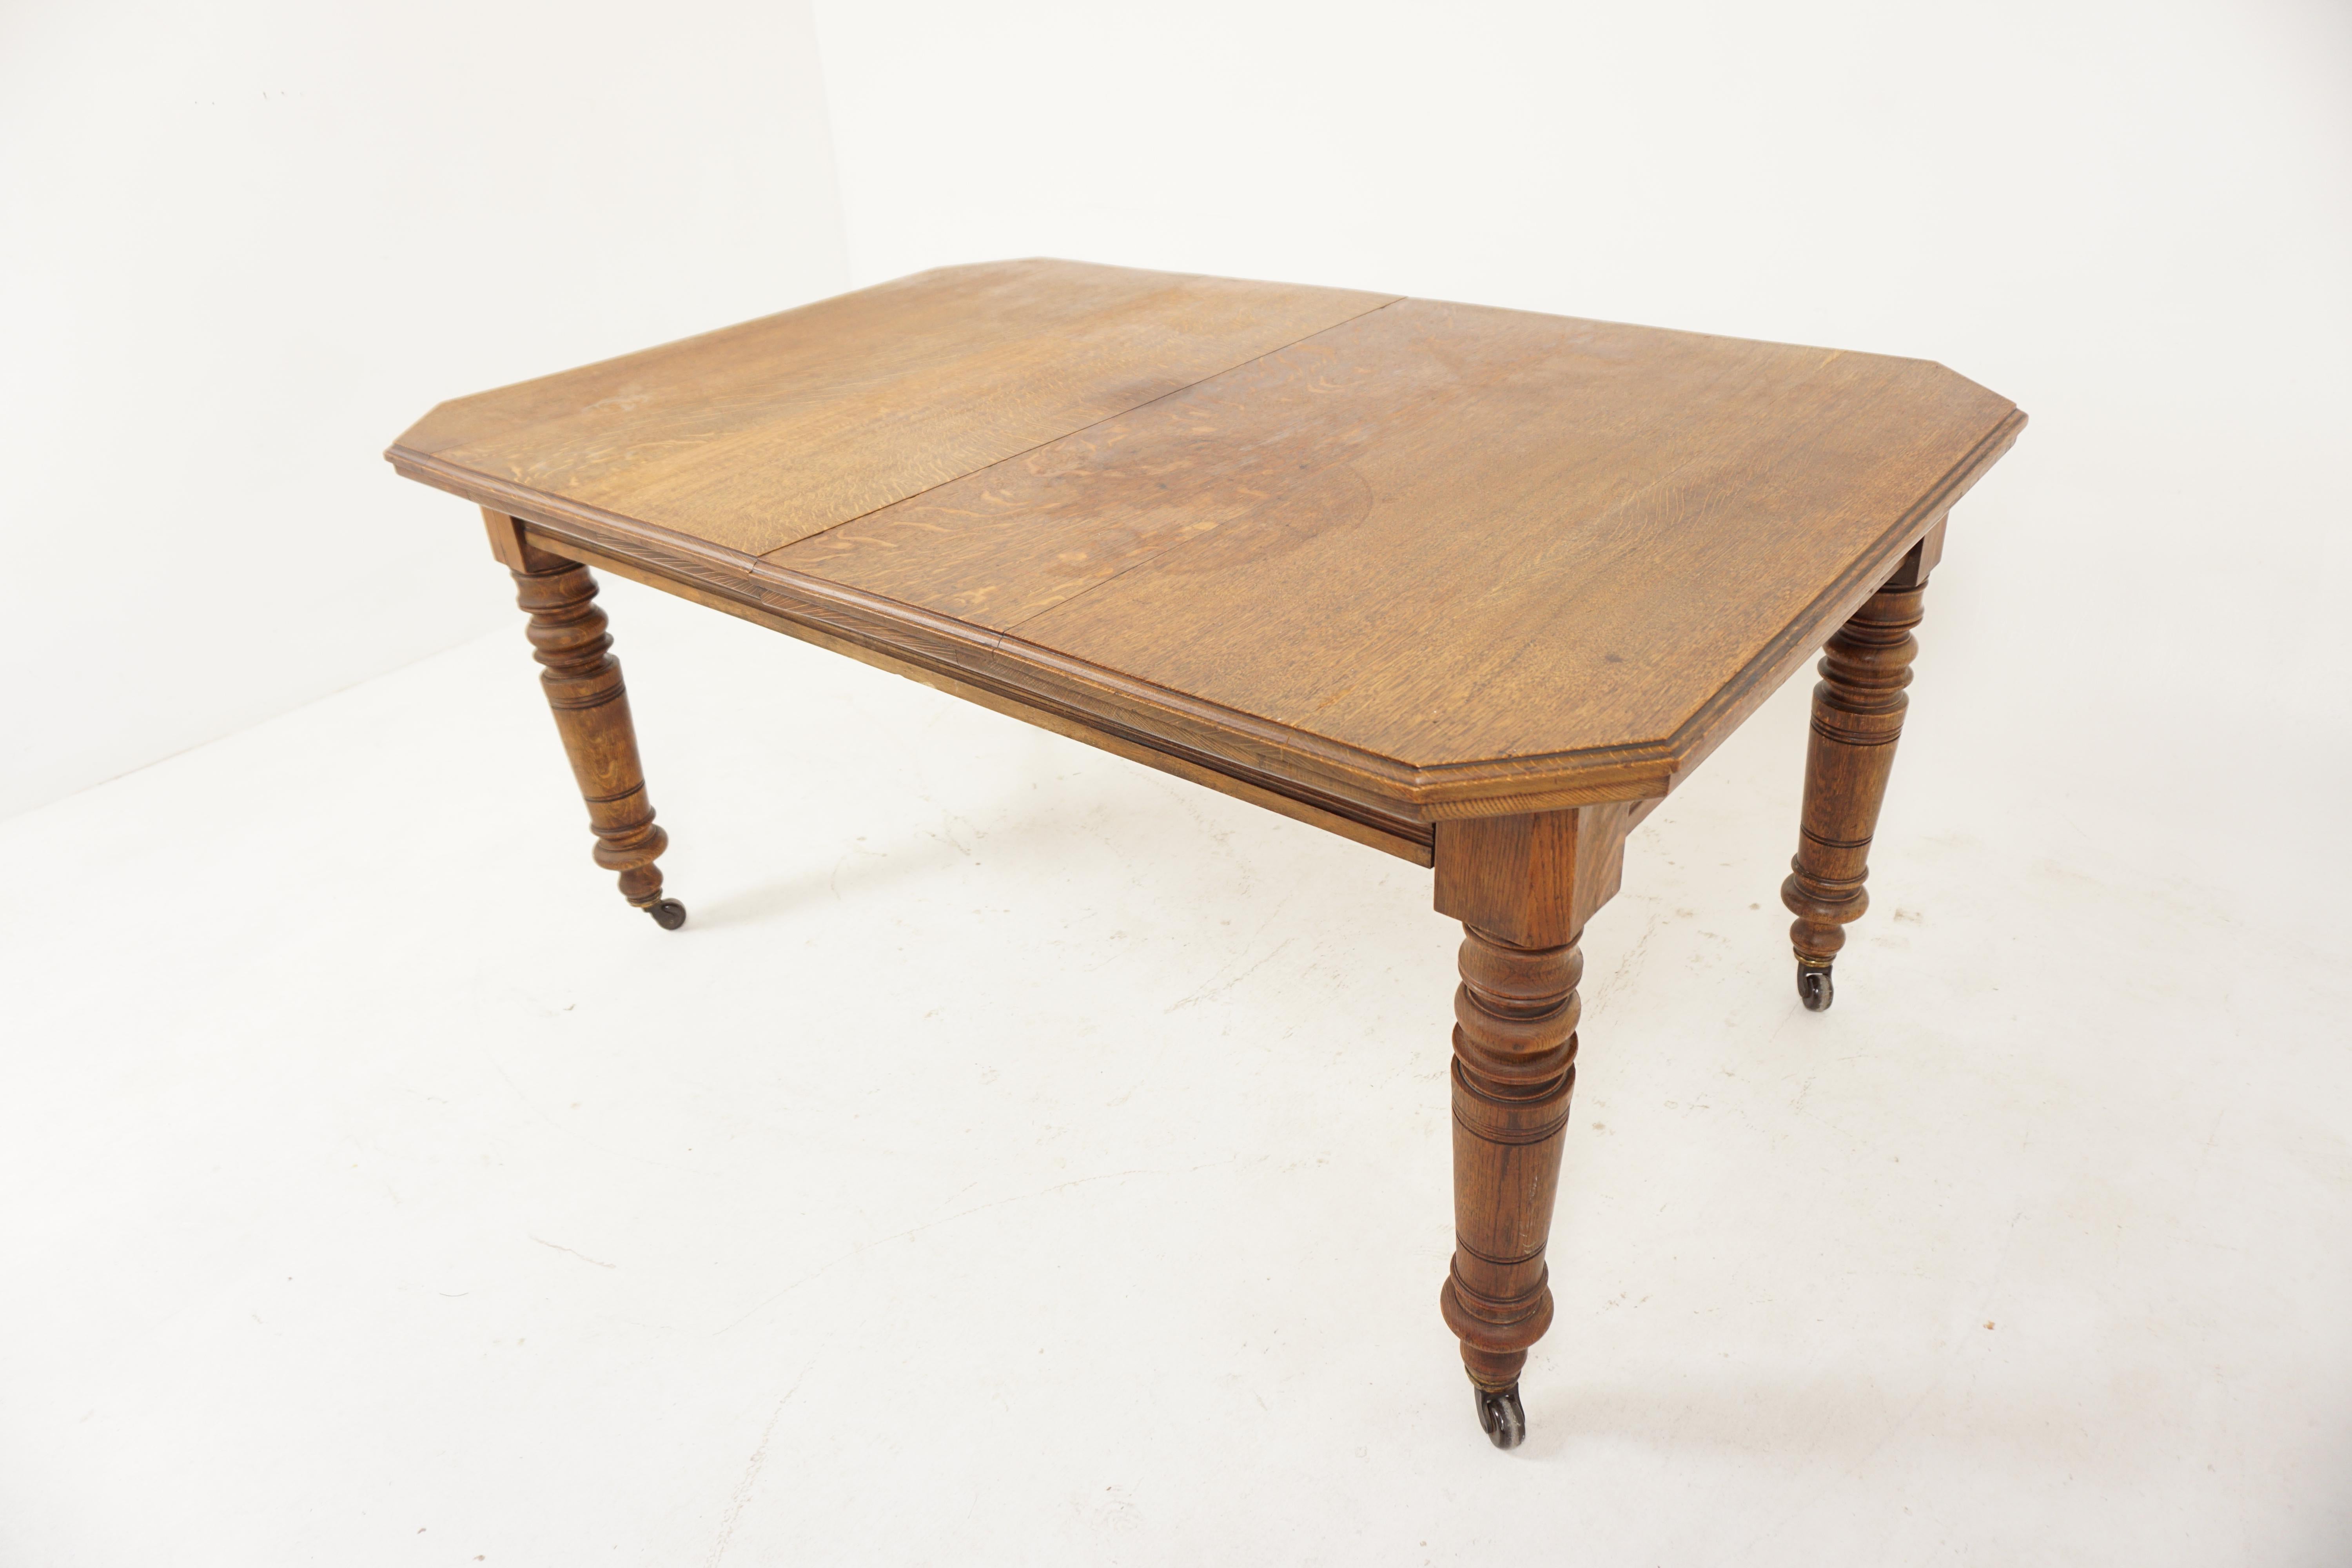 Antique Victorian tiger oak extending dining table, 1 leaf, Scotland 1890, B2914


Scotland 1890
Solid oak
Original finish
Rectangular top with shaped canted ends
Carved skirt underneath
All standing on four large turned legs
Table comes